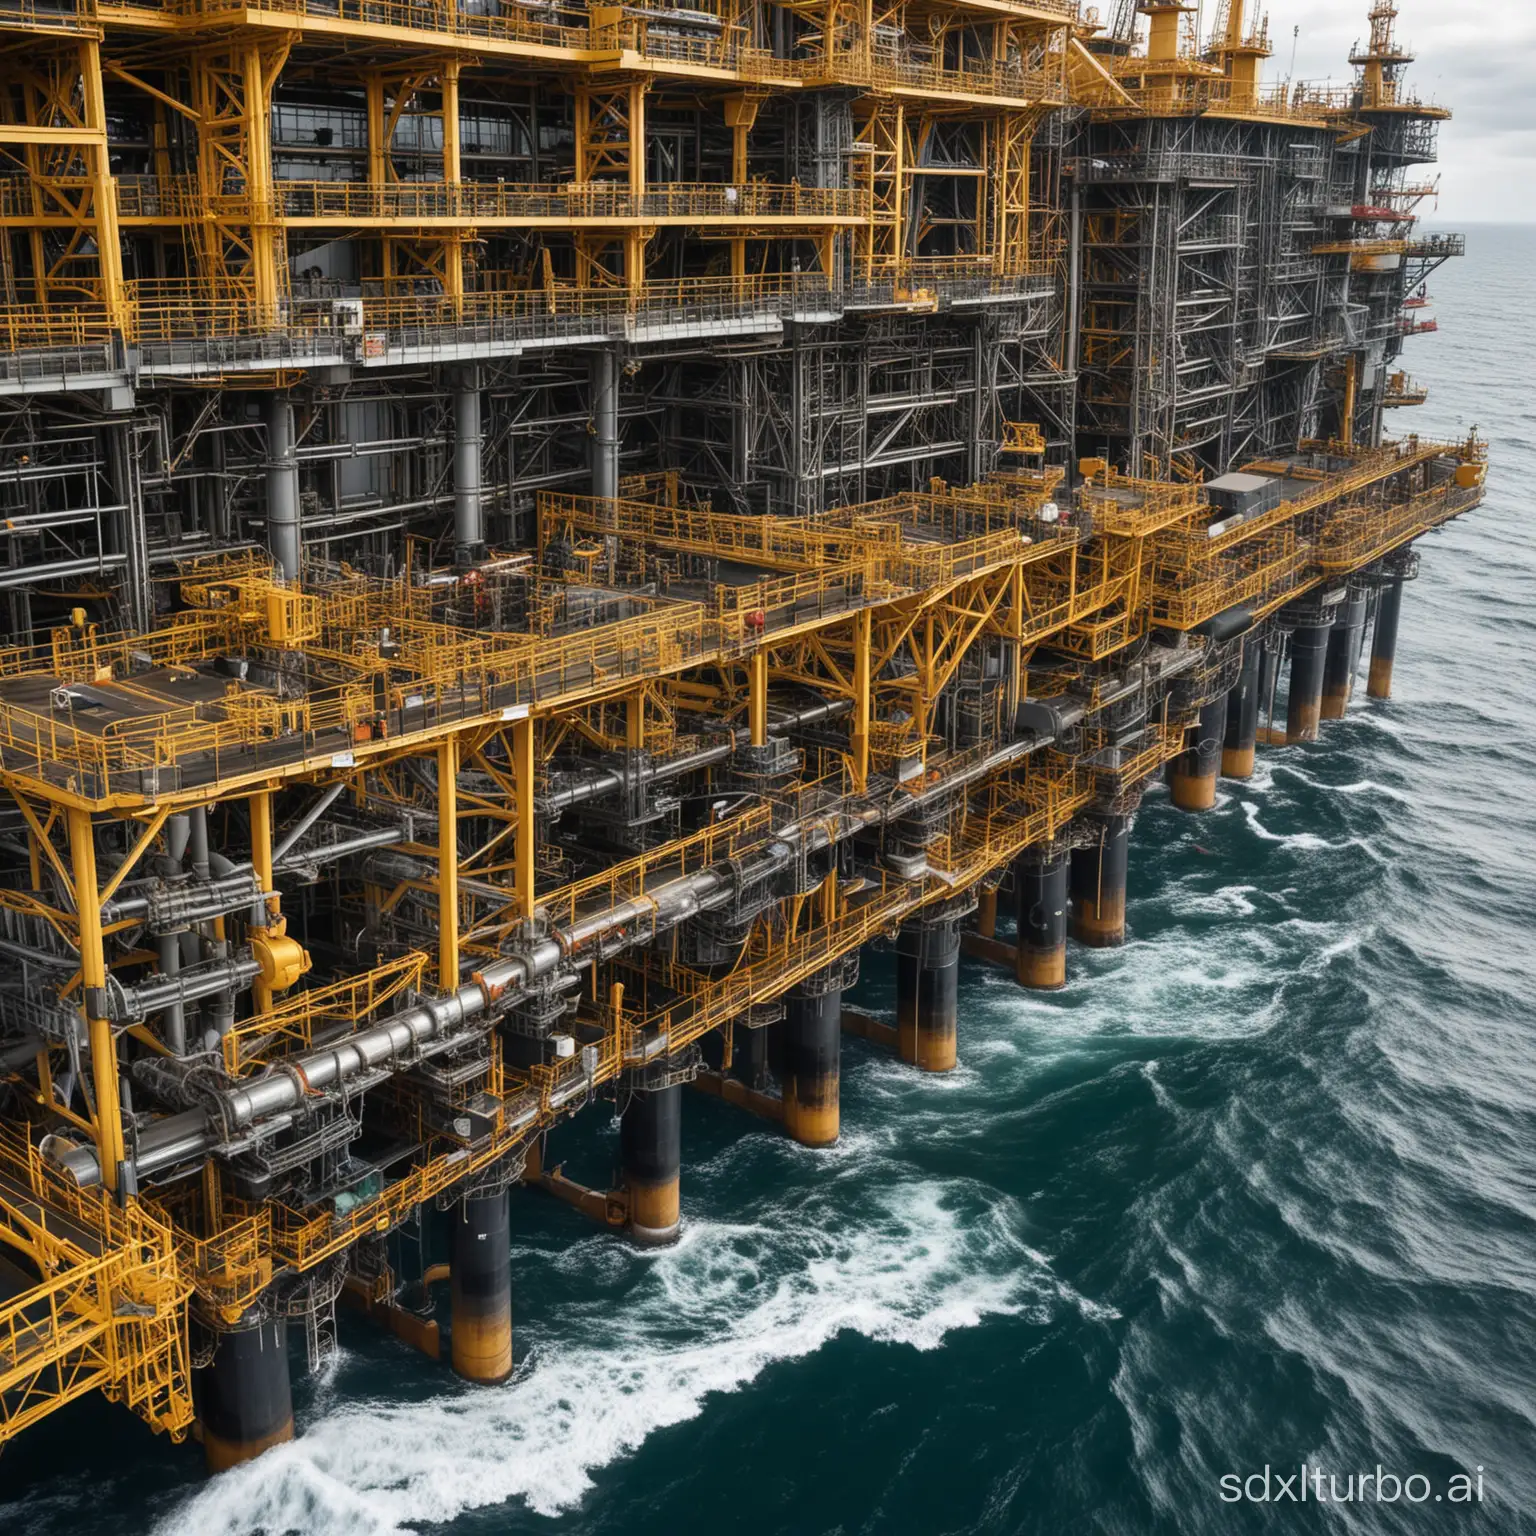 Oil and gas industry across Offshore and Onshore upstream and midstream engineering domains

Sealines
Subsea Umbilicals, Risers & Flowlines (SURF)
Offshore Platforms 
Offshore Platforms Topsides

